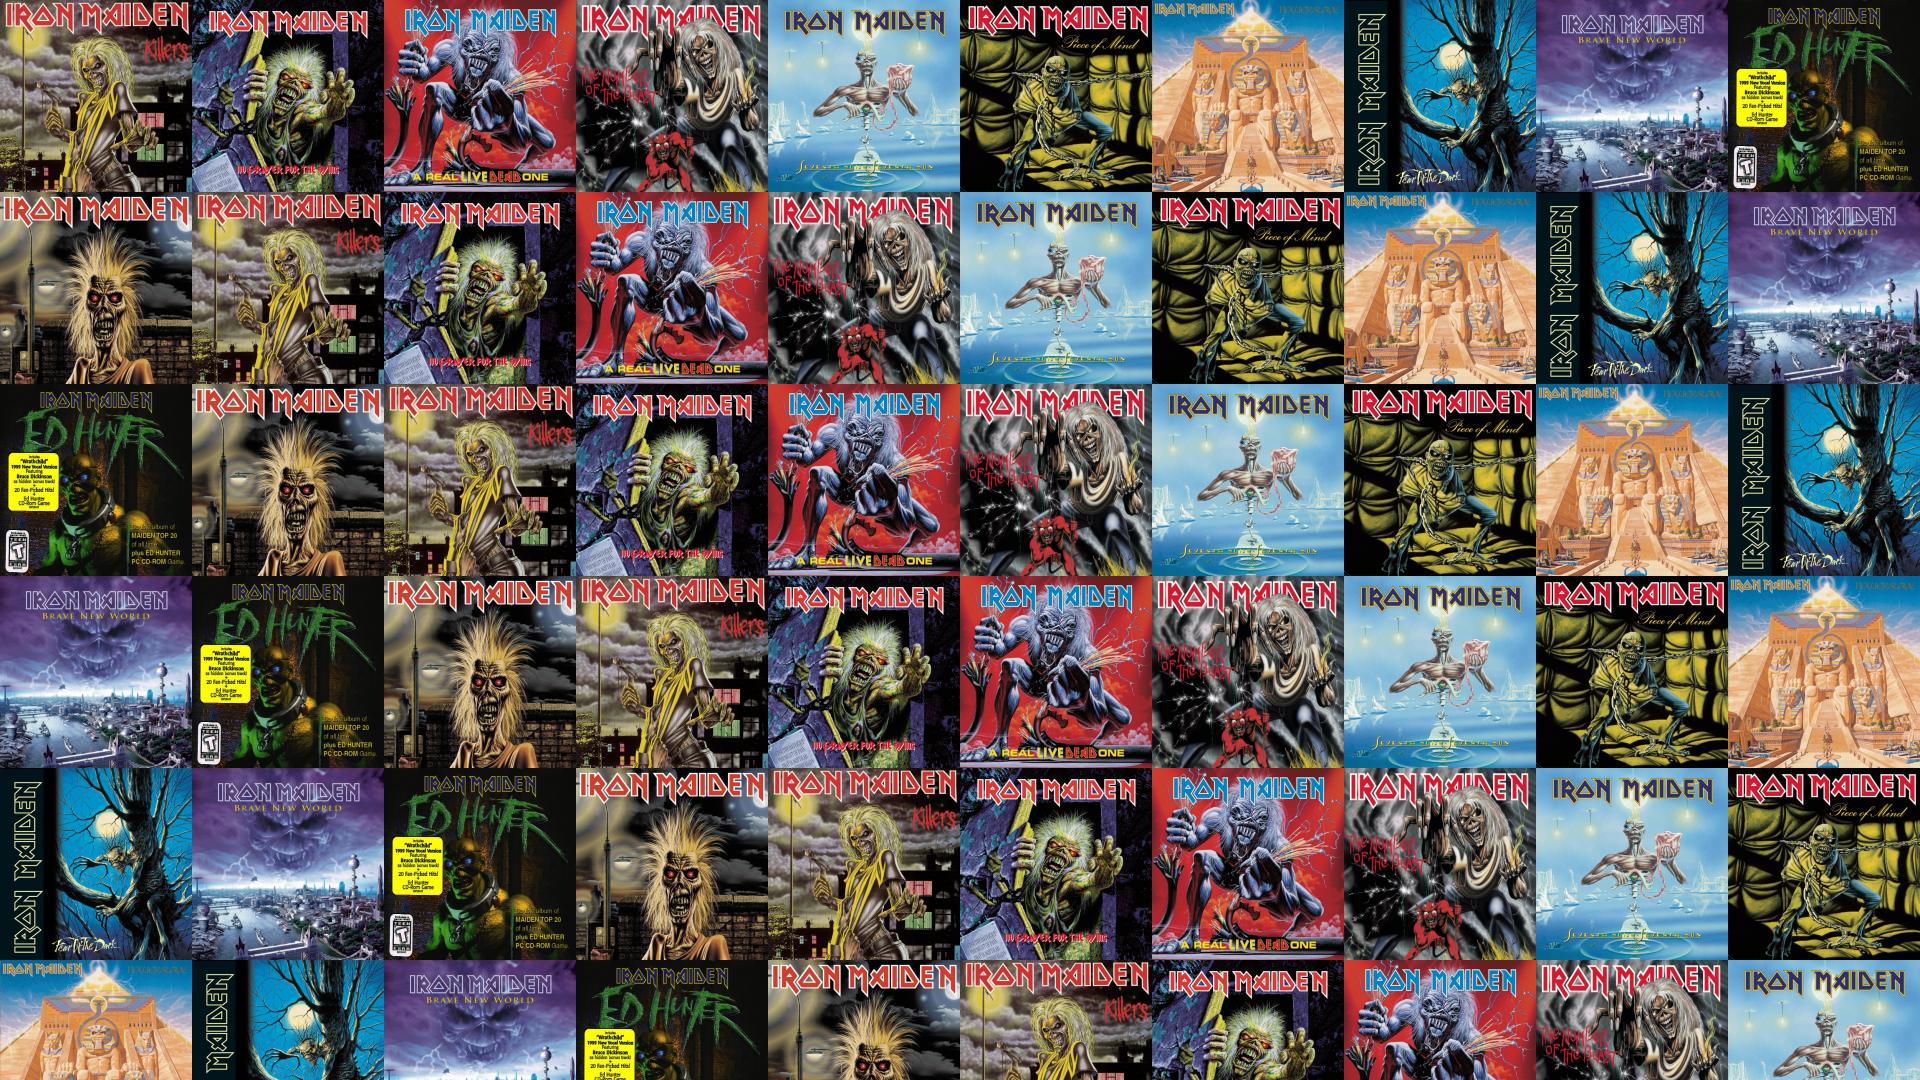 Real Live Dead One Iron Maiden - HD Wallpaper 